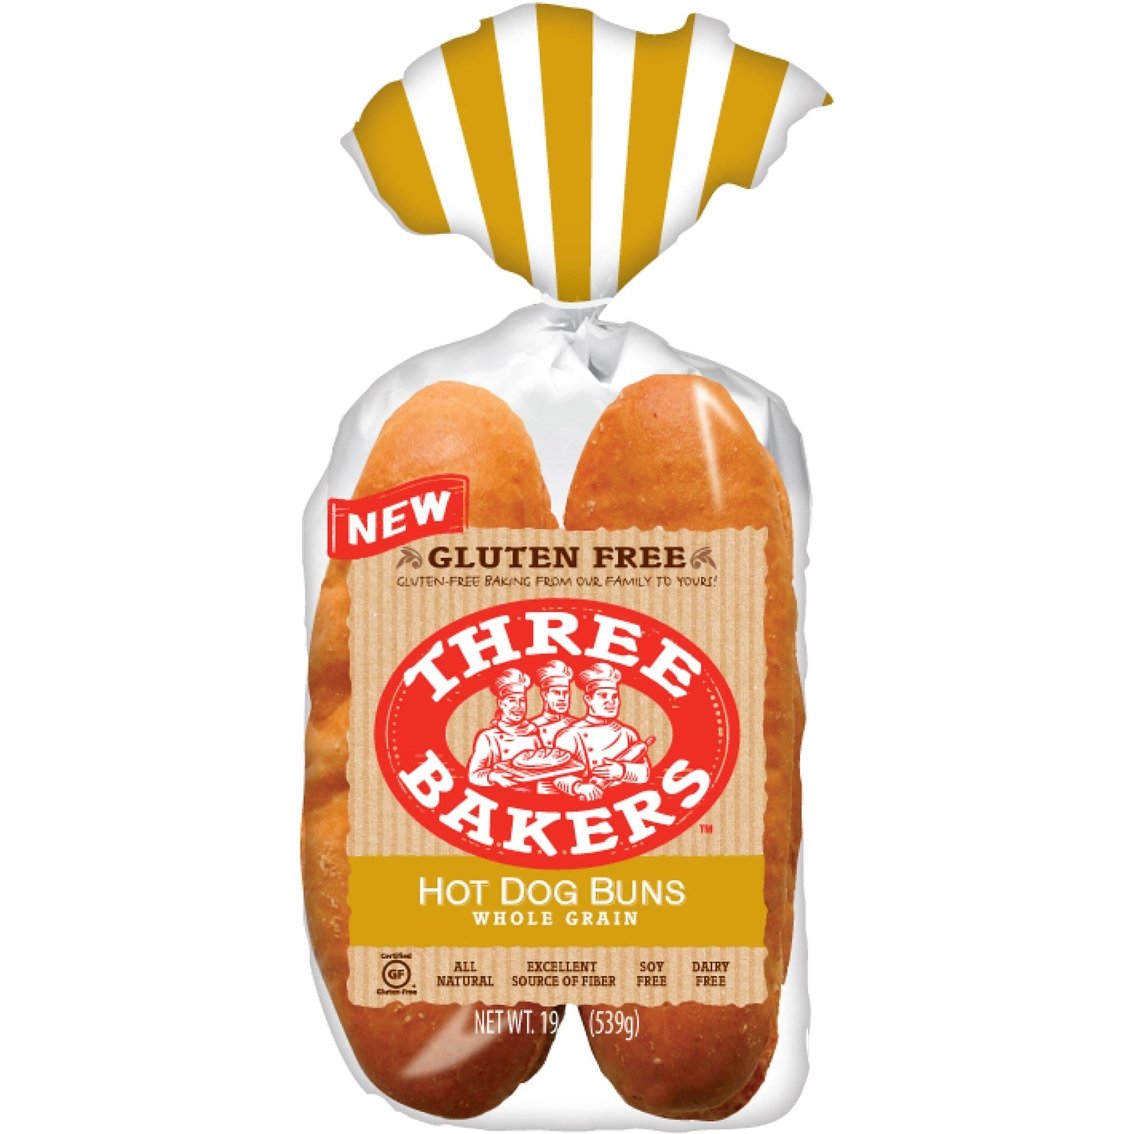 Two Three Bakers gluten-free hot dog buns in one bag